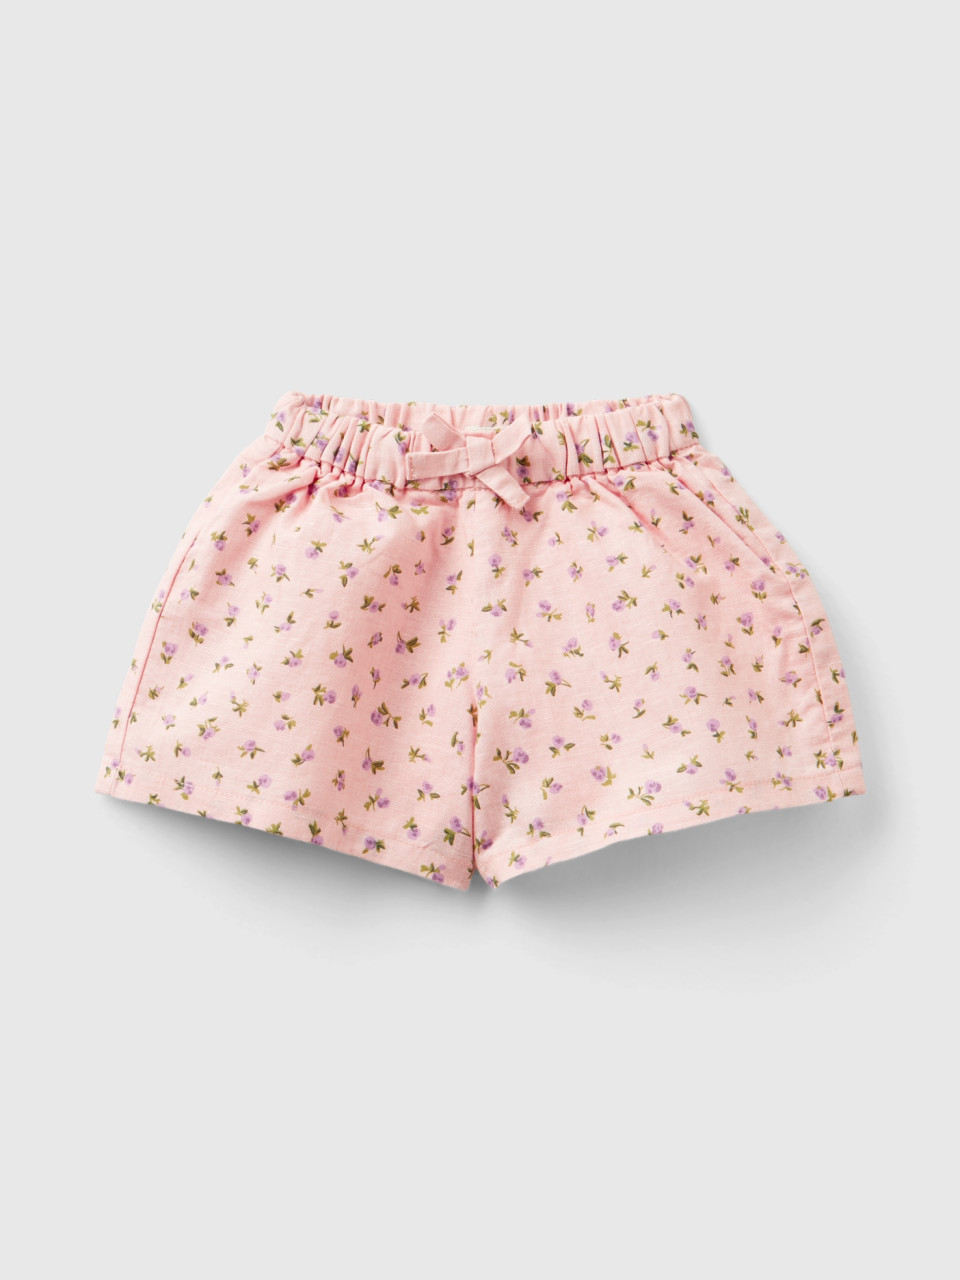 Benetton, Floral Culottes, Pink, Kids